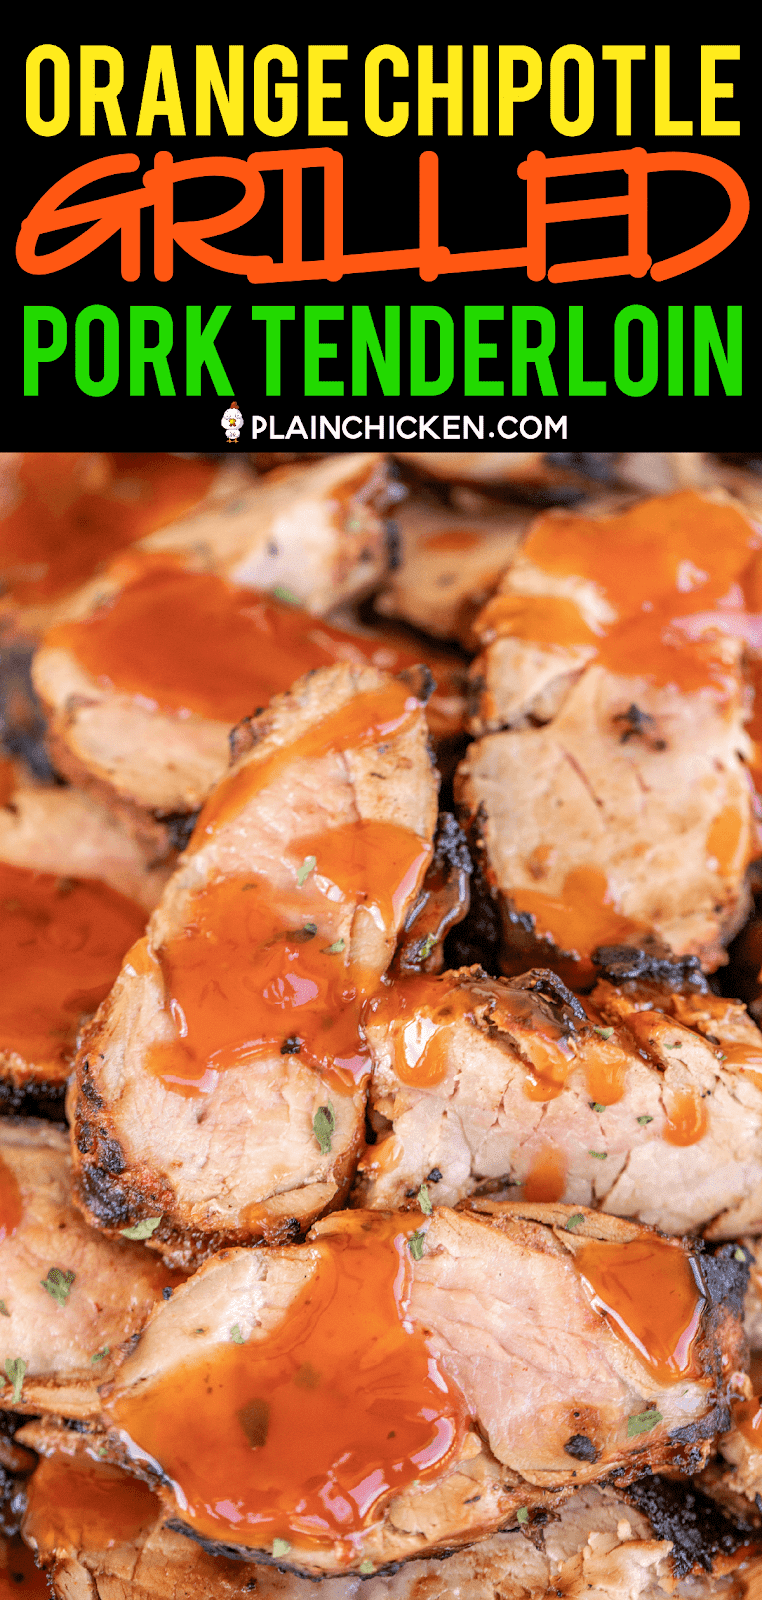 cooked pork tenderloin slices drizzled with BBQ sauce